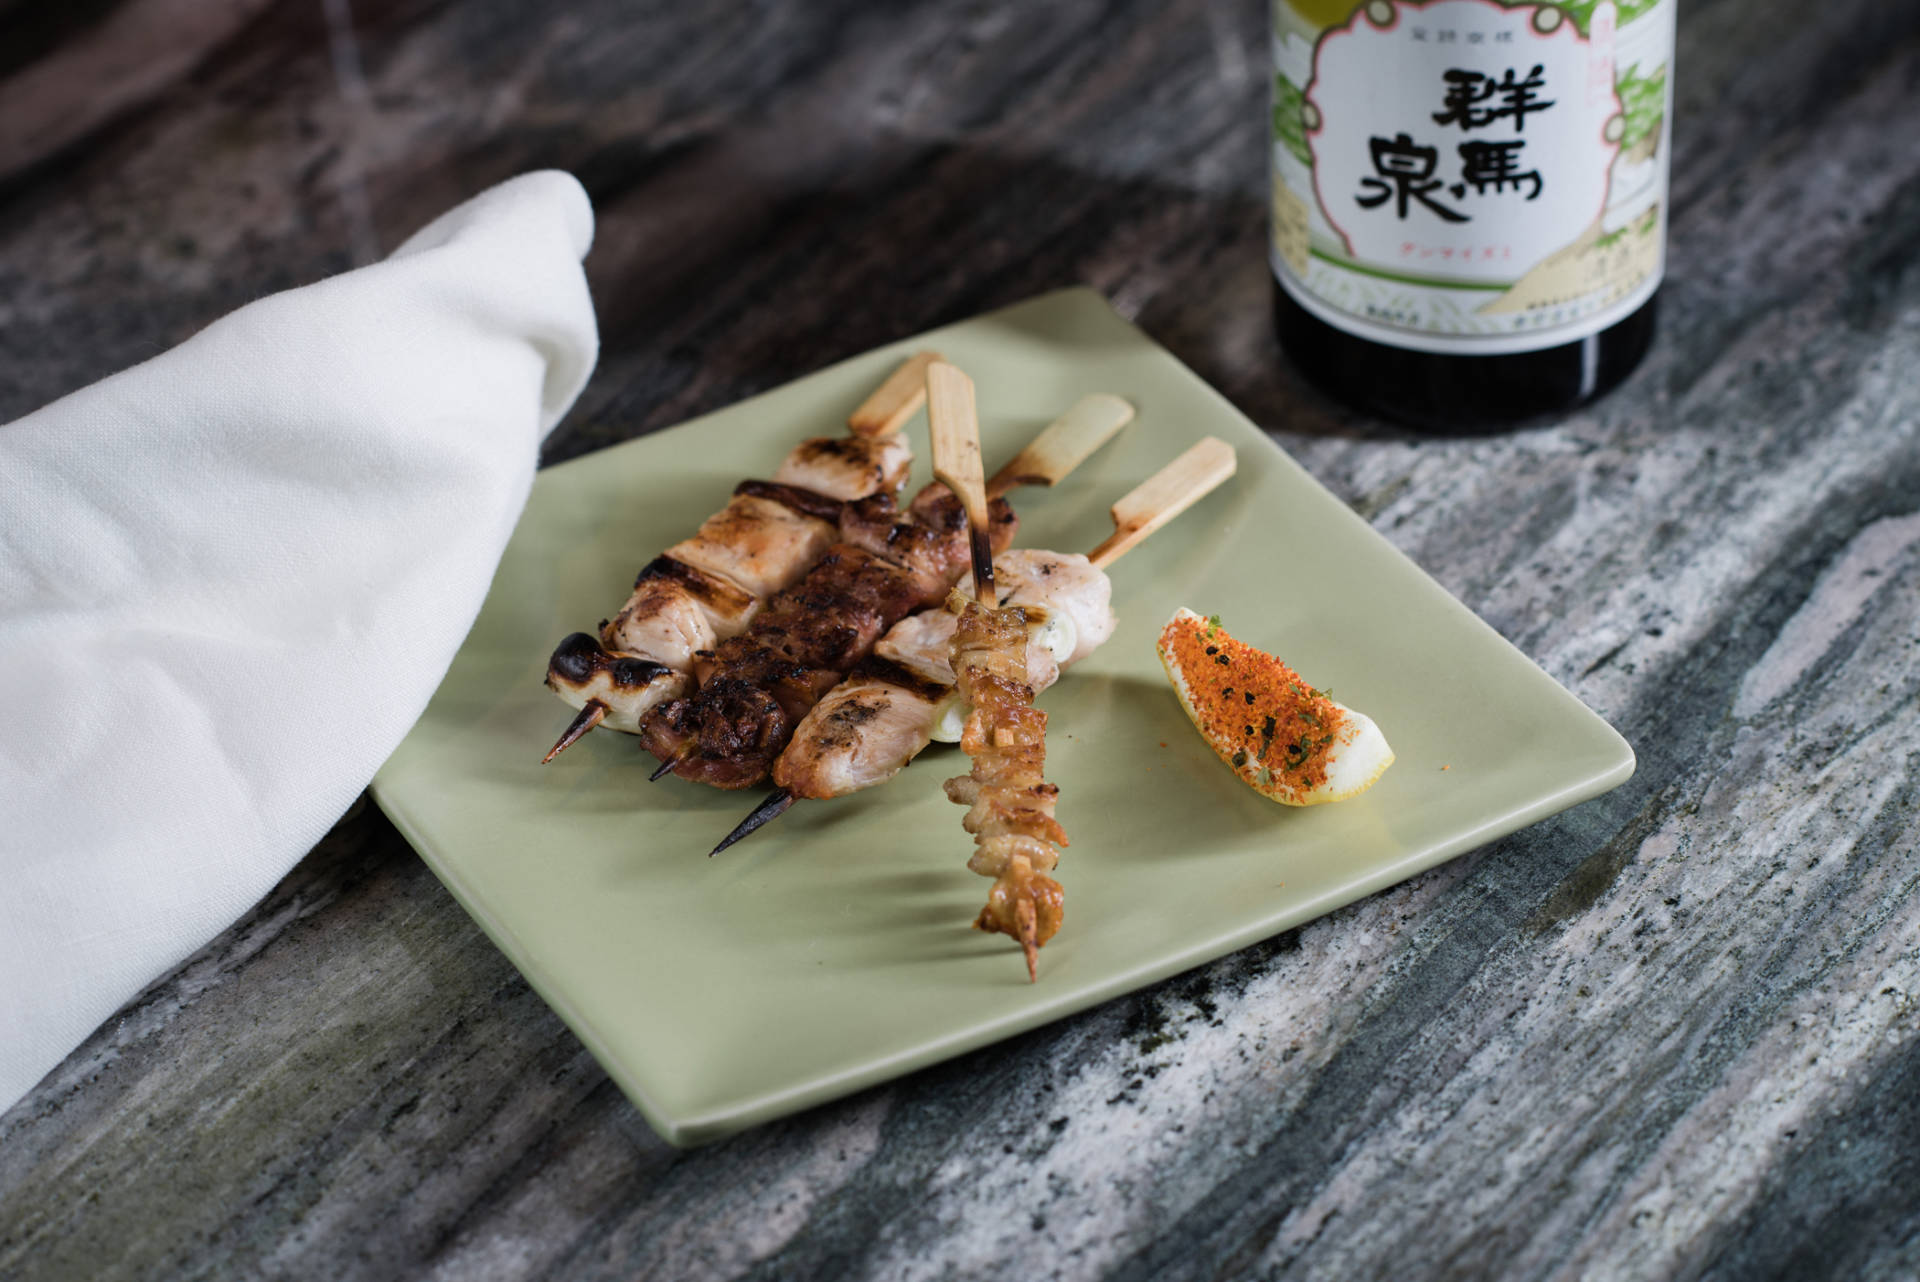 Get a taste of yakitori from chef Curtis DiFede at Miminashi in Napa.